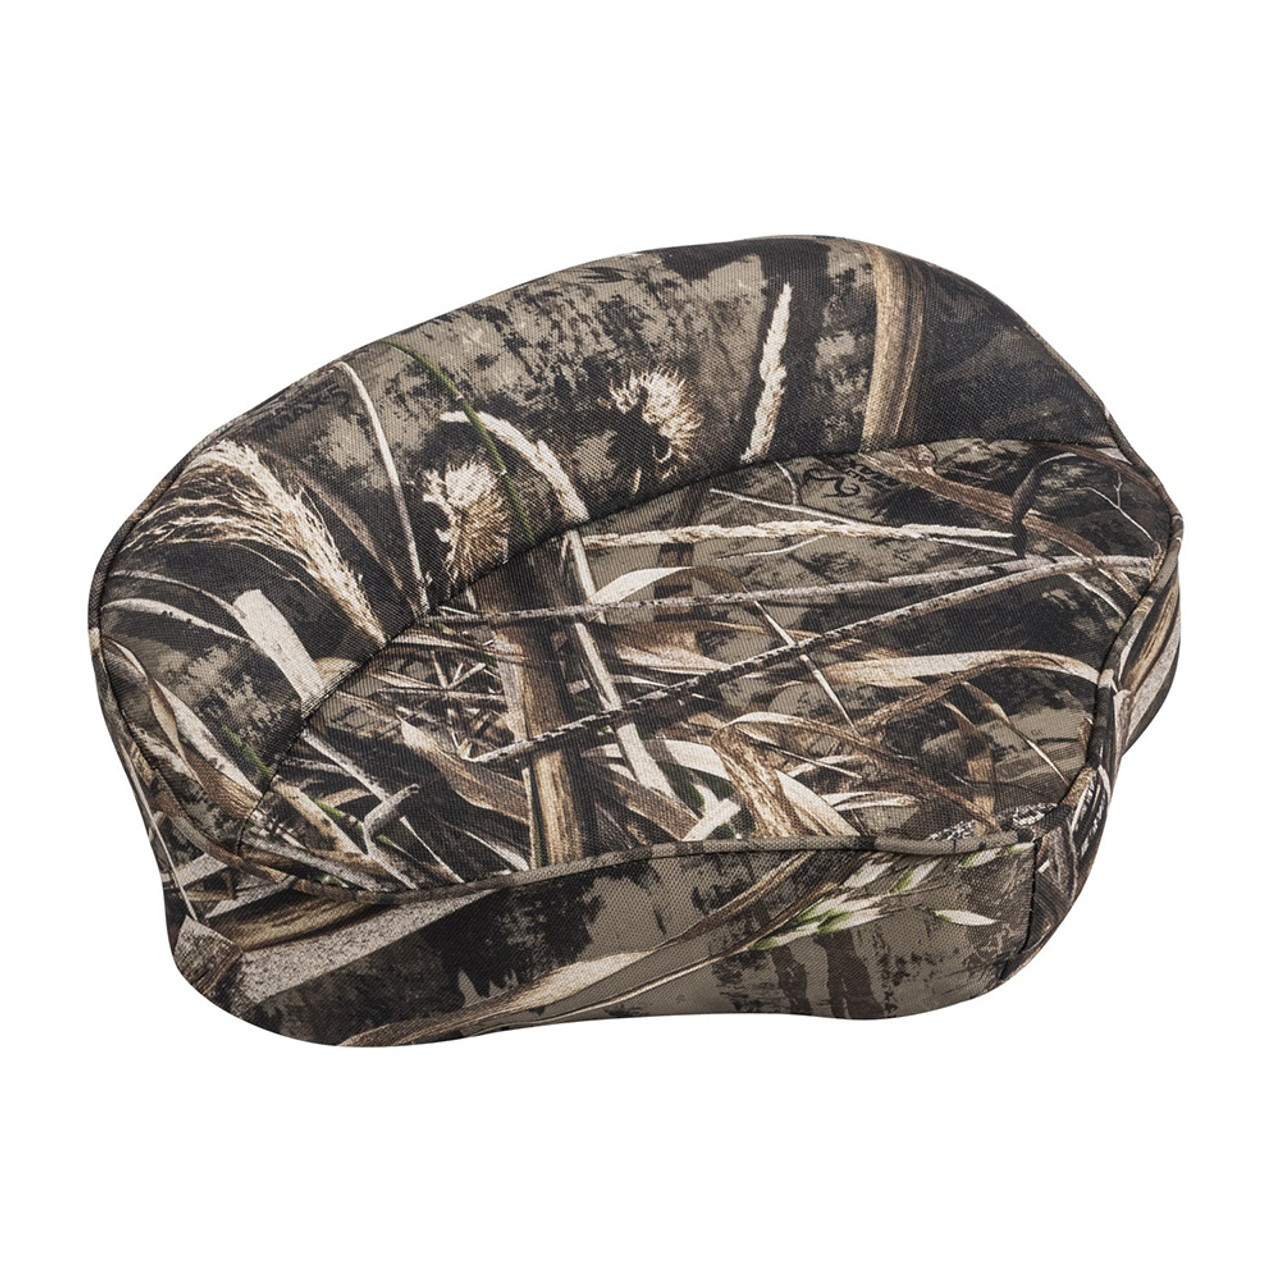 Wise 8wd112bp-733 Pro Casting Seat, Camo Realtree Max 5